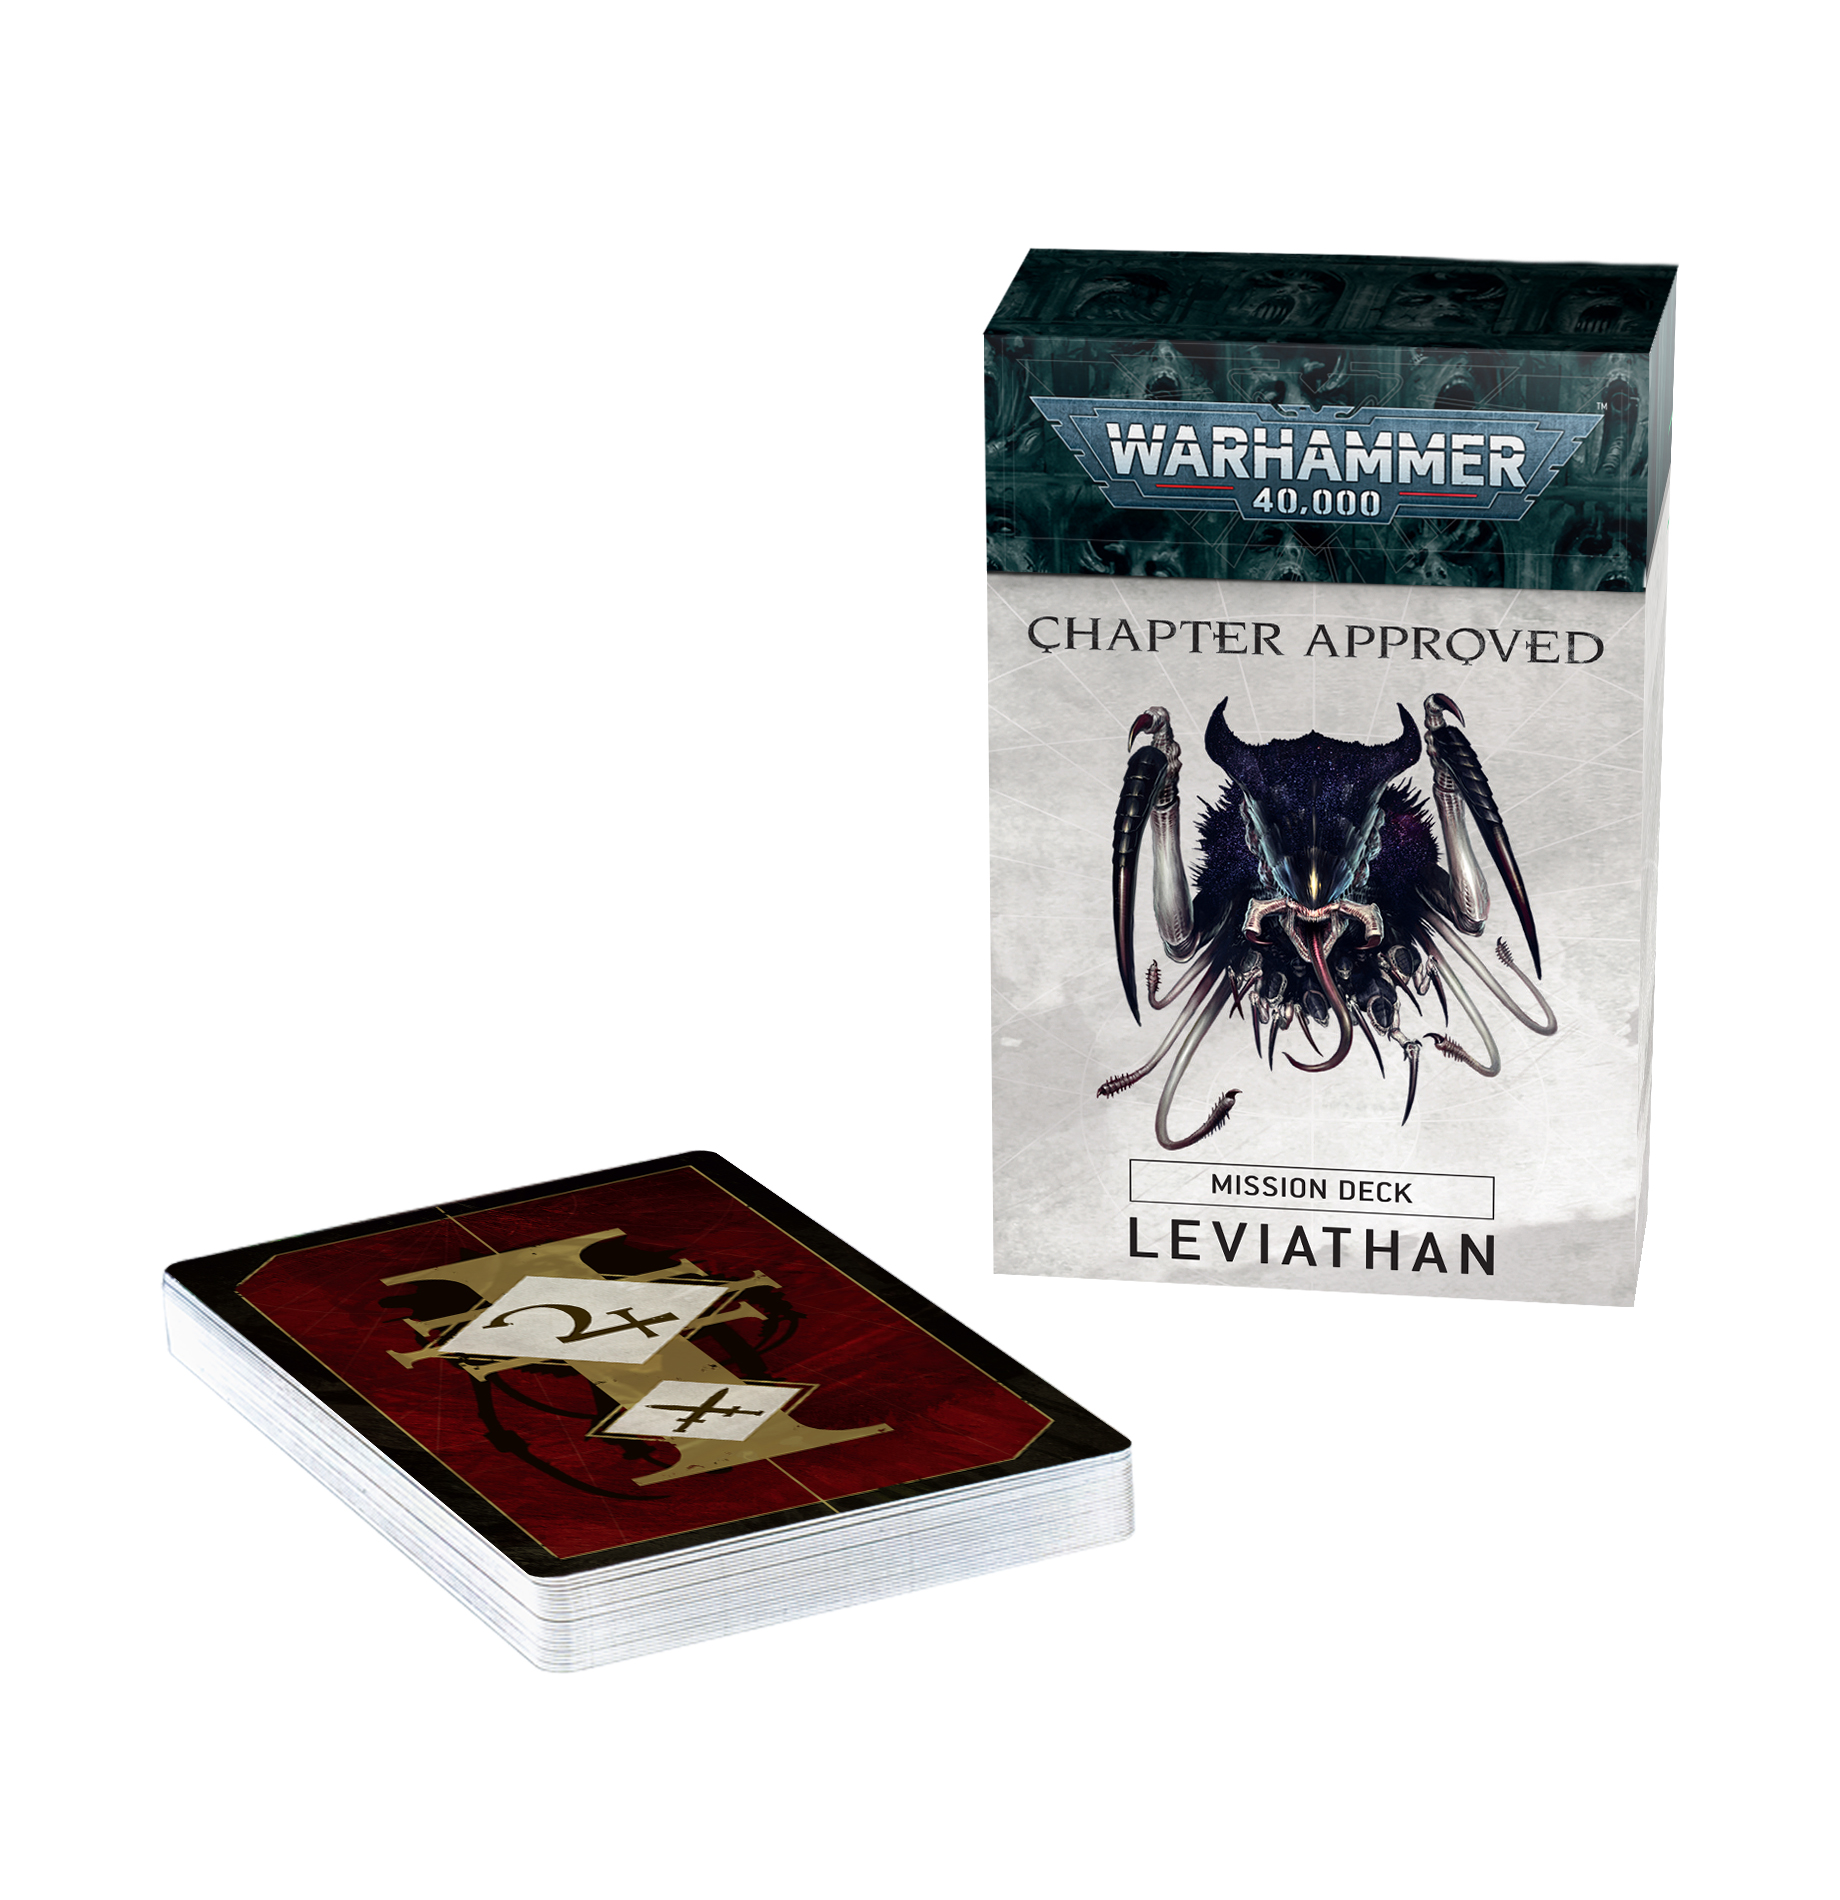 Warhammer Chapter Approved Mission Deck - Leviathan